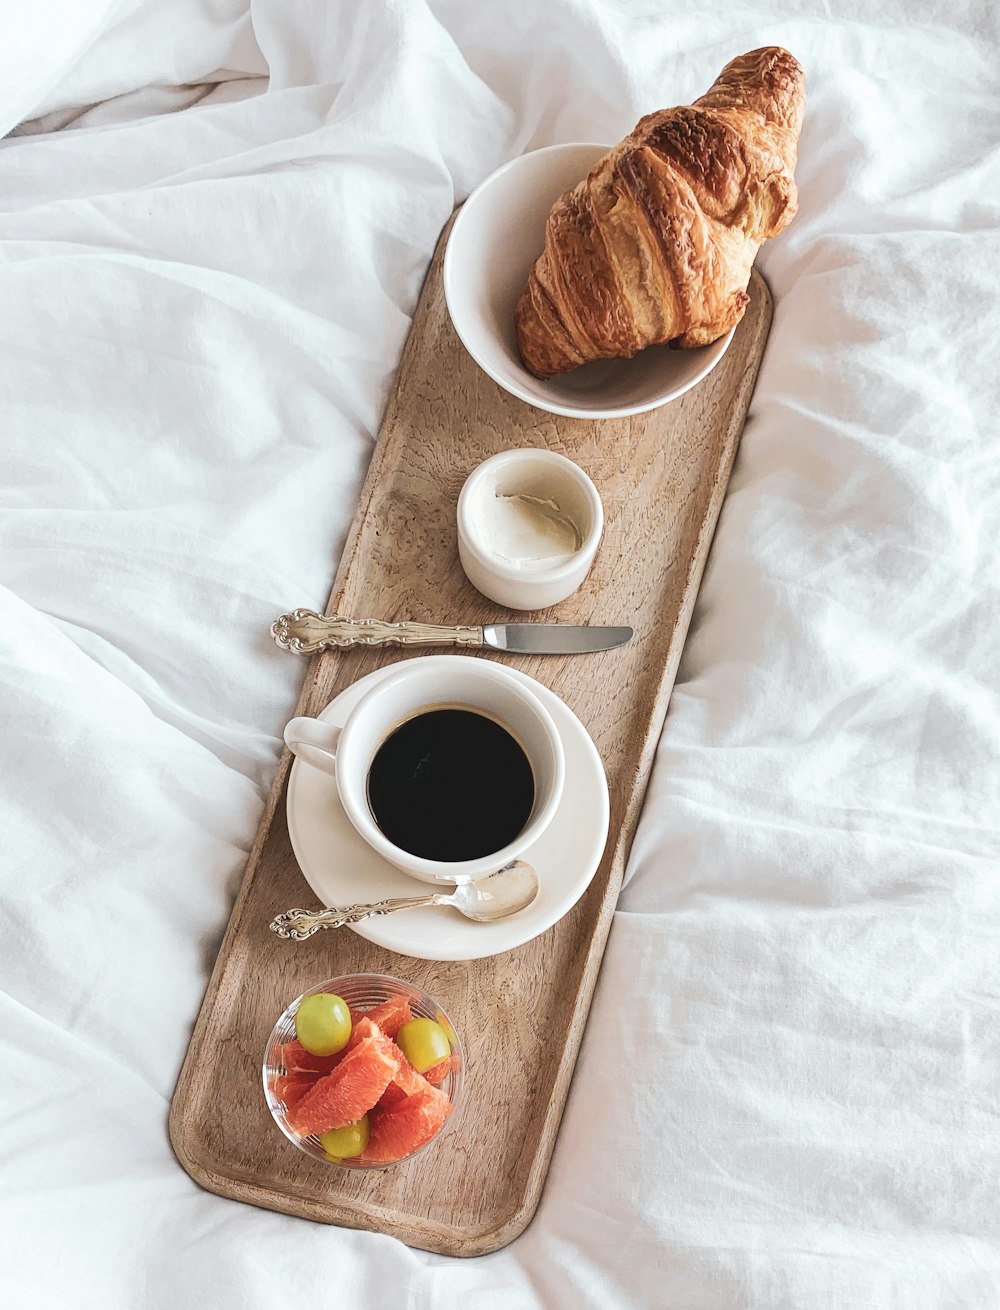 a tray with a croissant, coffee and fruit on it